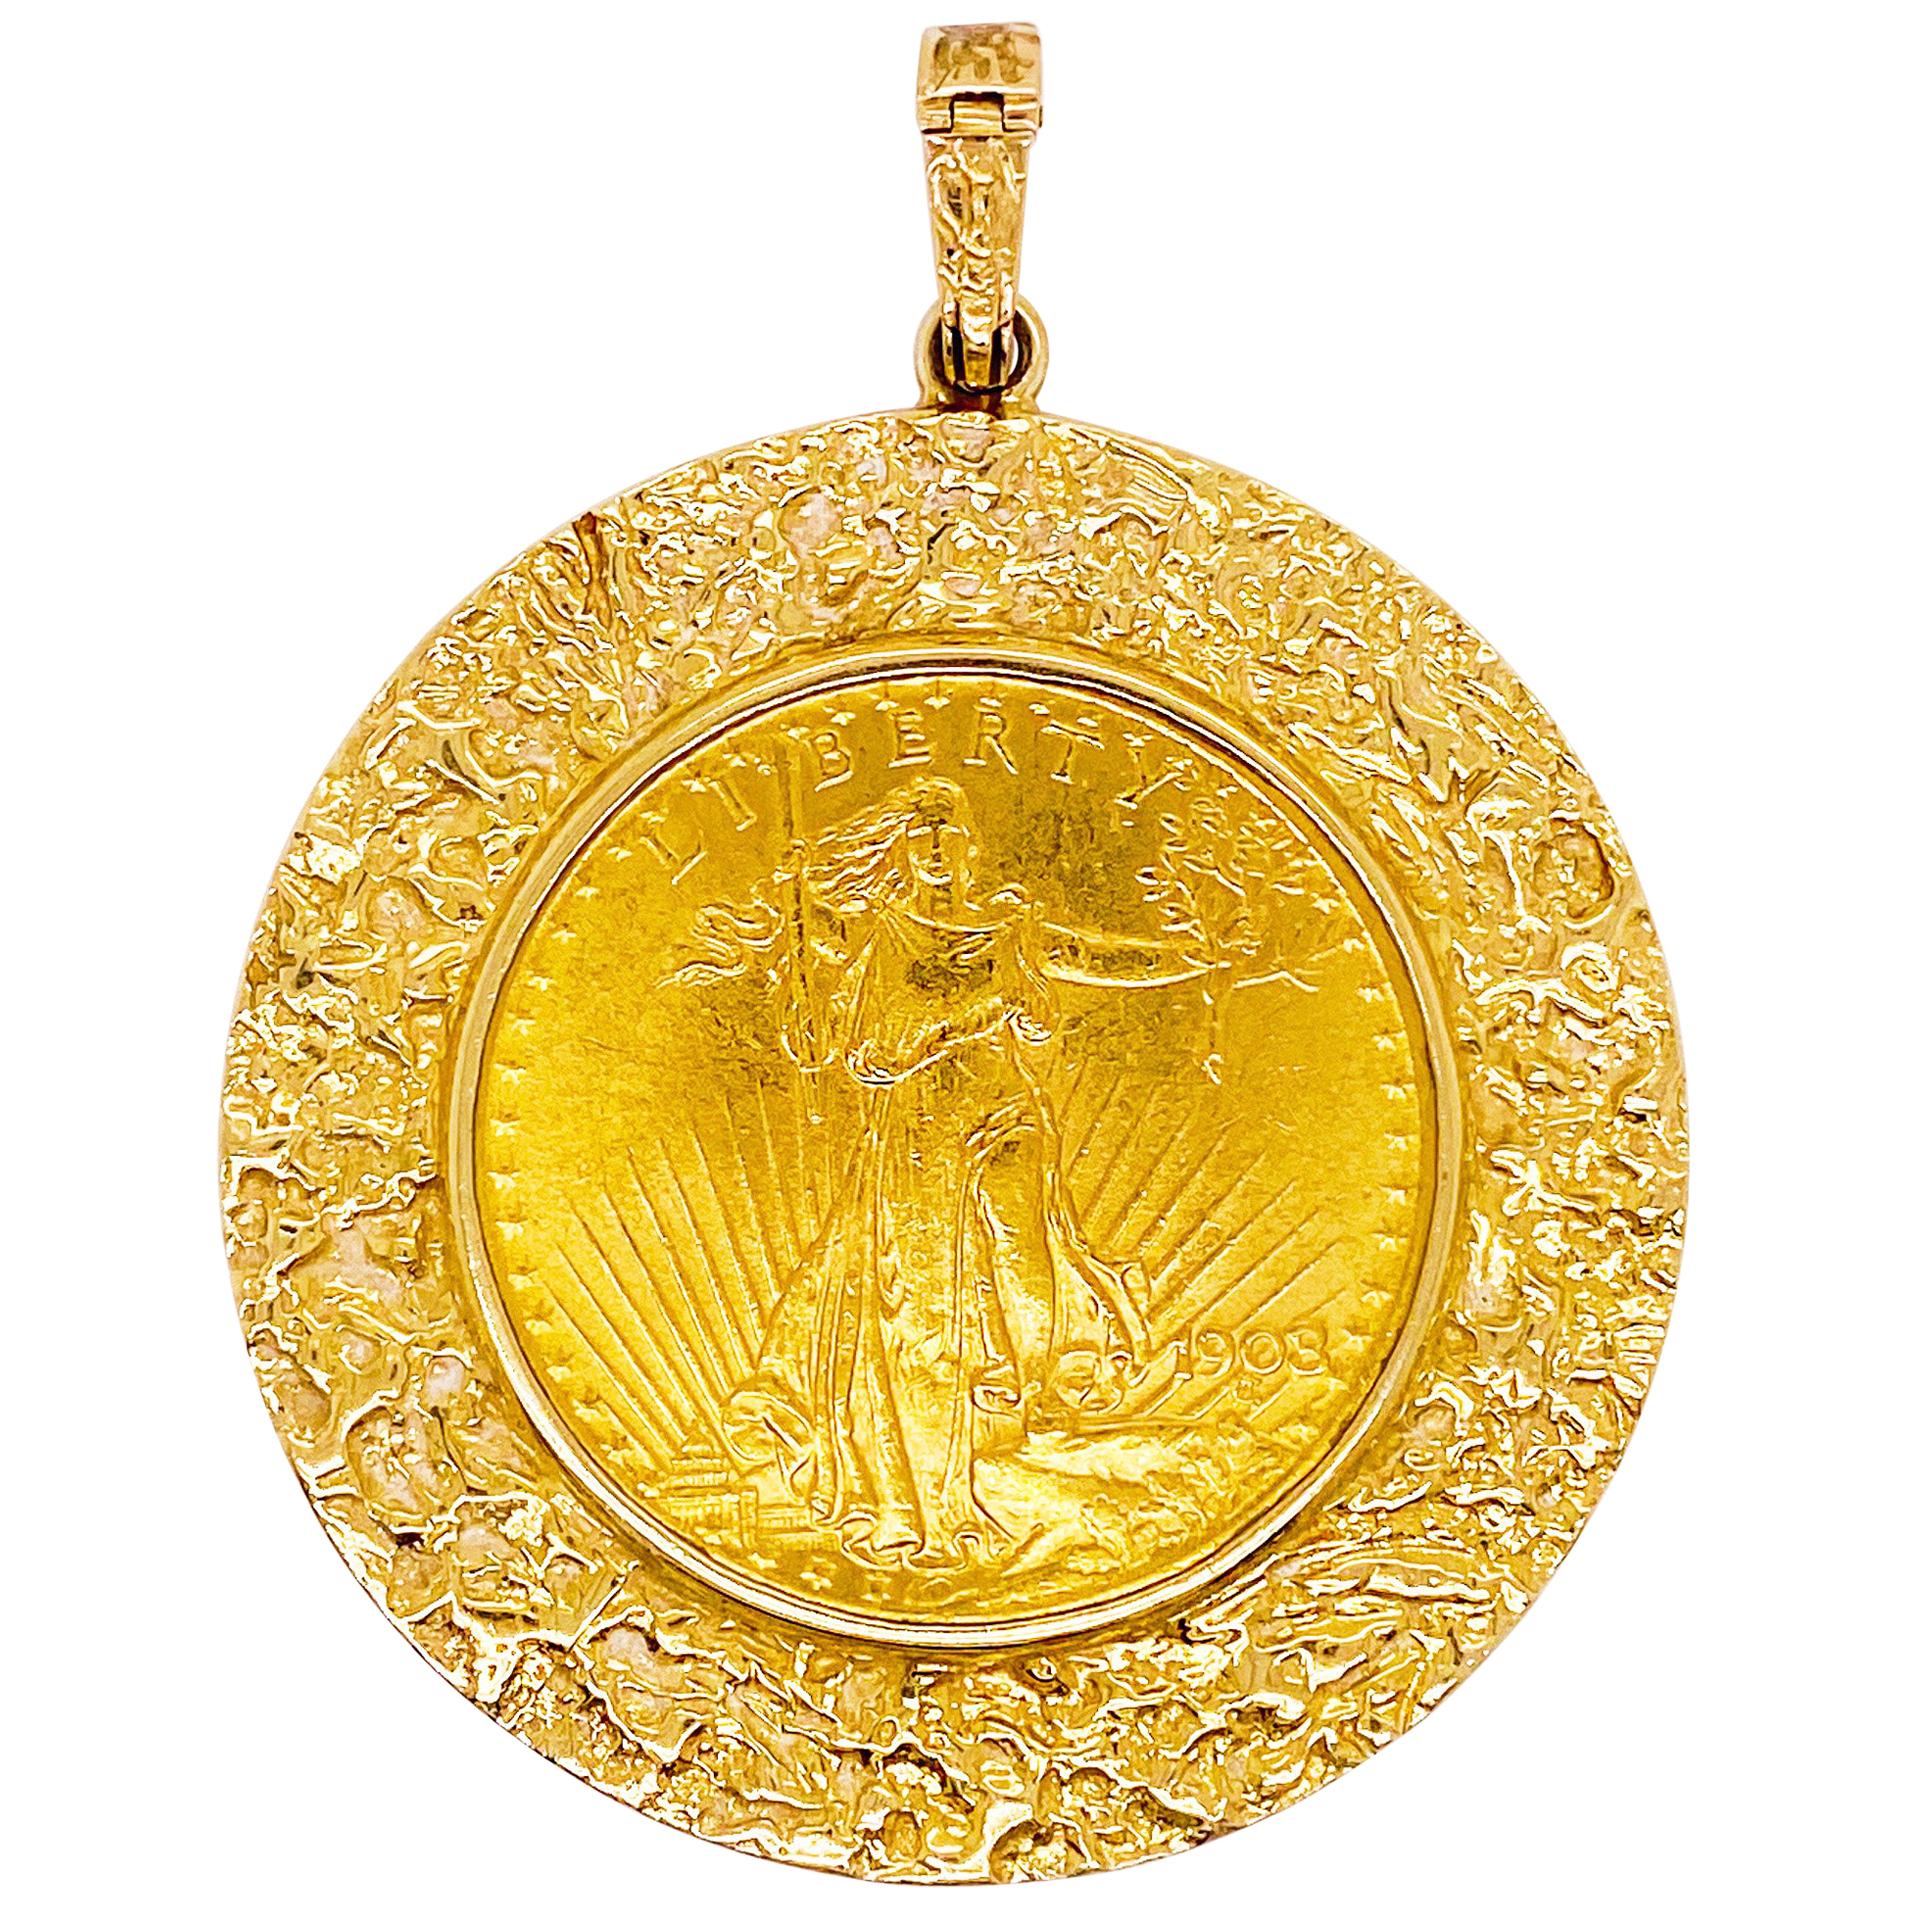 1908 Gold Coin-US Lady Liberty in Excellent Condition w 14k Gold Nugget Pendant